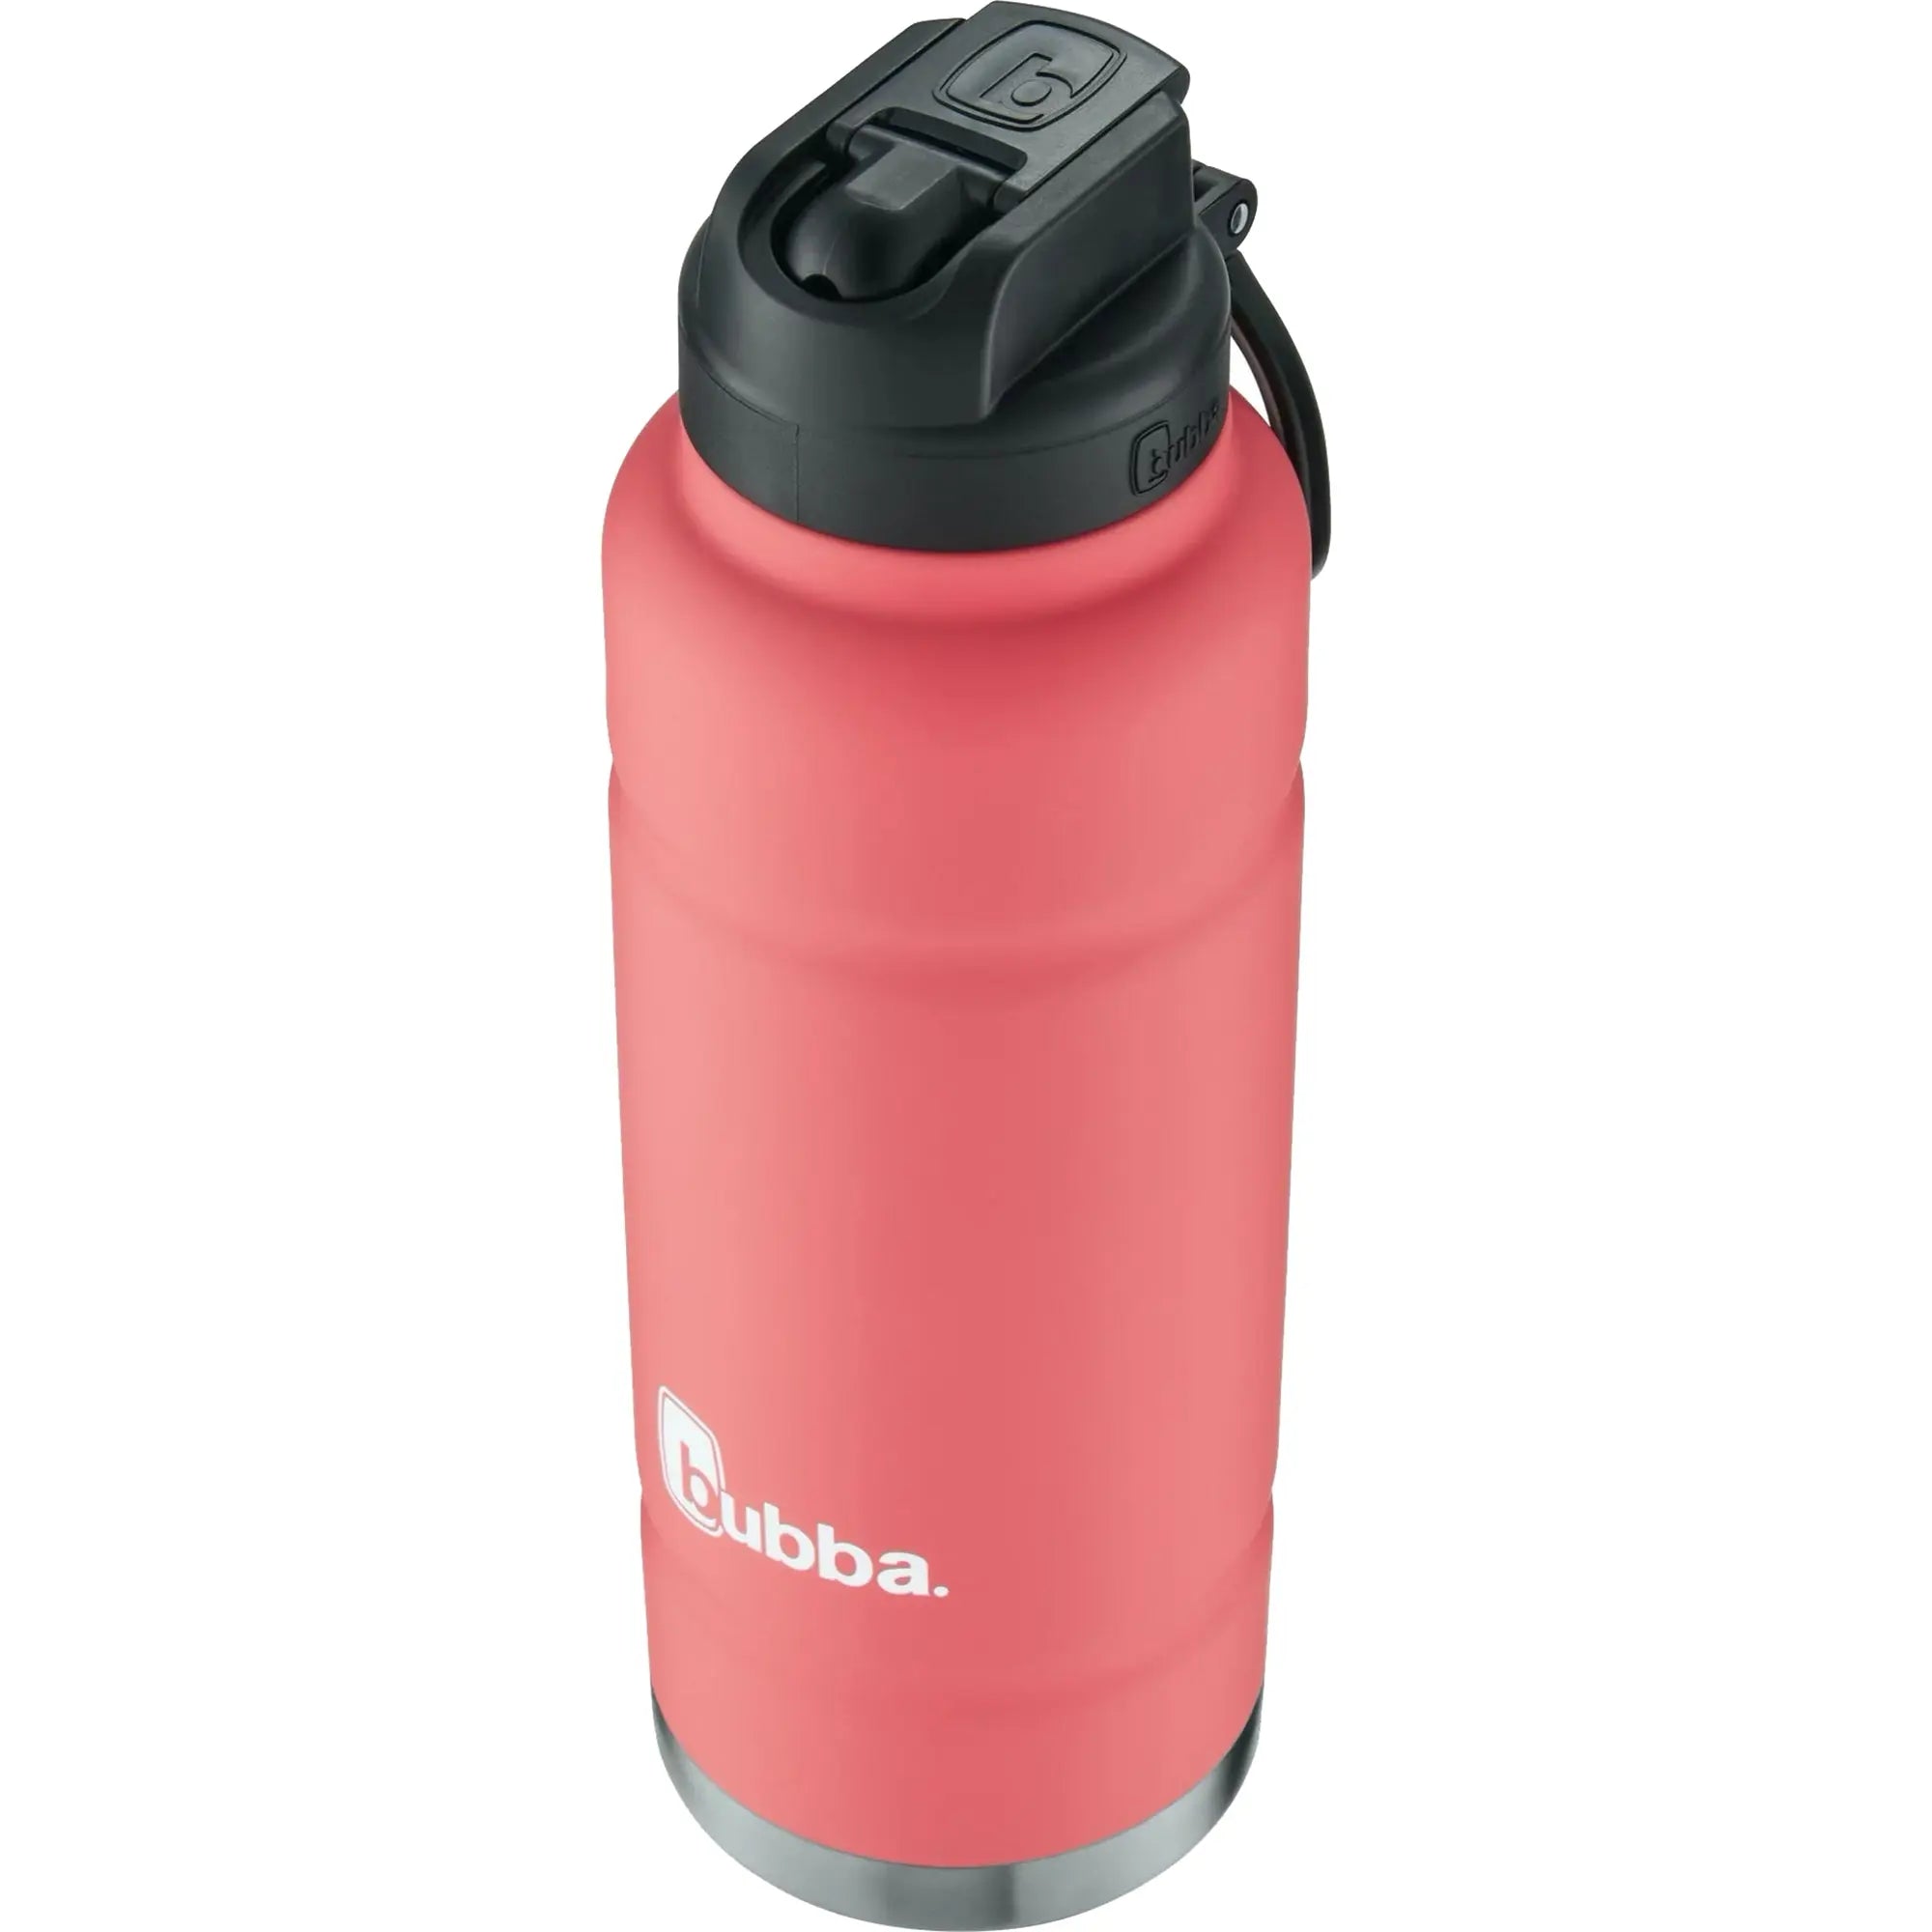 Bubba 40 oz. Trailblazer Insulated Stainless Steel Water Bottle - Electric Berry Bubba